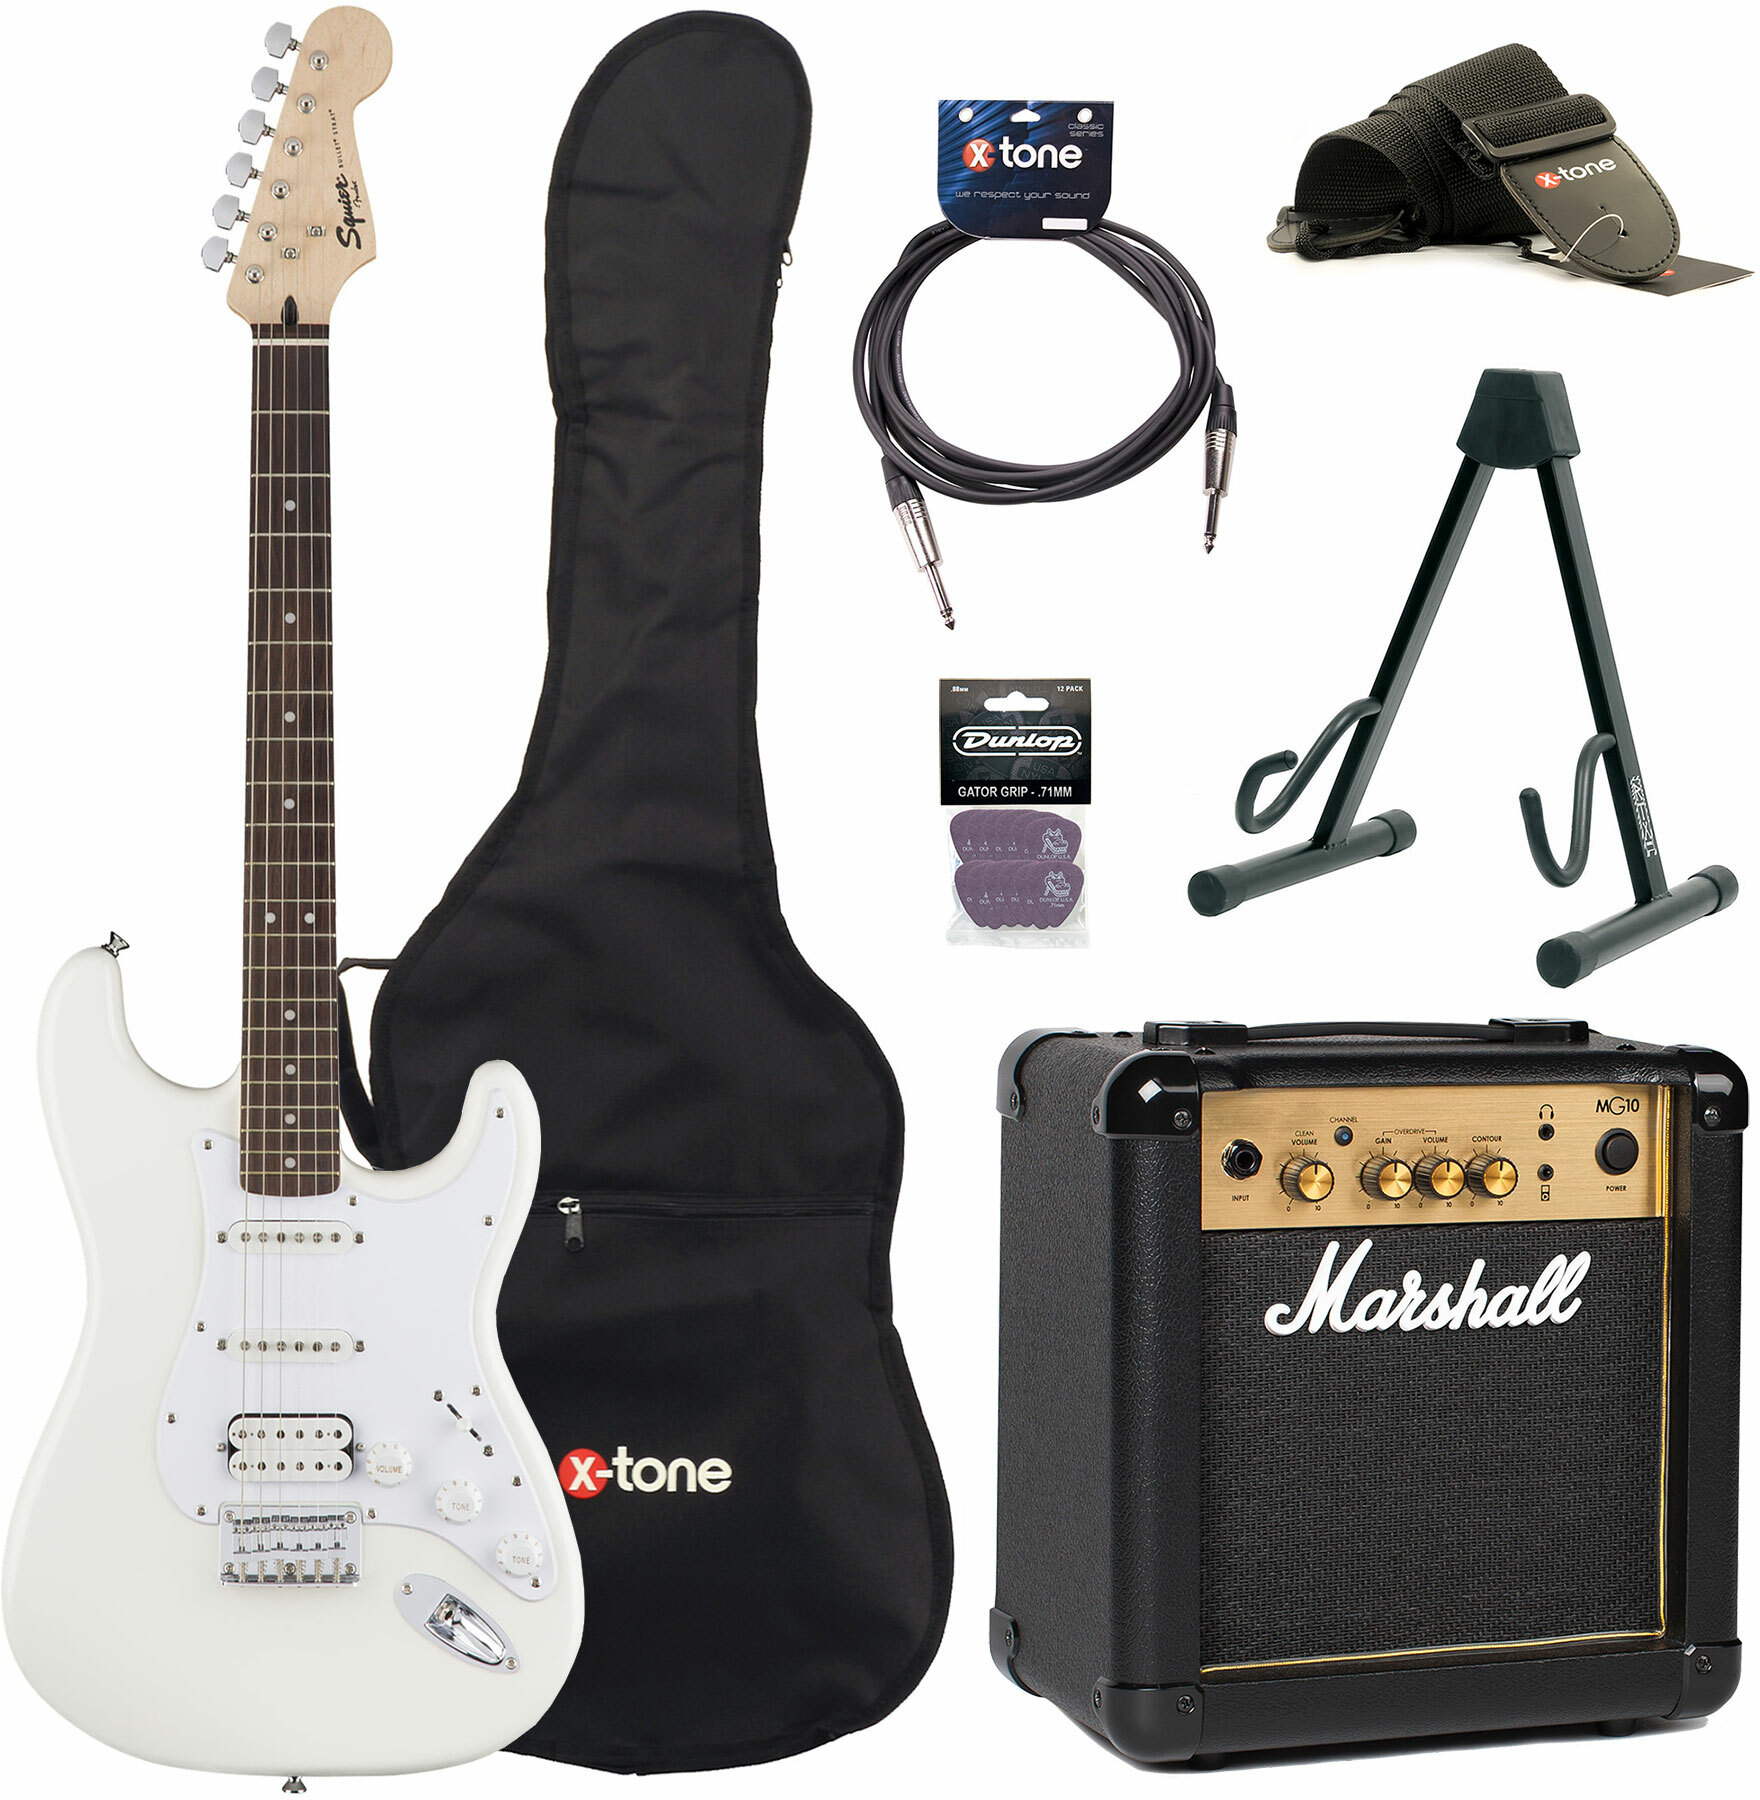 Squier Strat Bullet Ht Hss + Marshall Mg10g + Access X-tone - Arctic White - Electric guitar set - Main picture